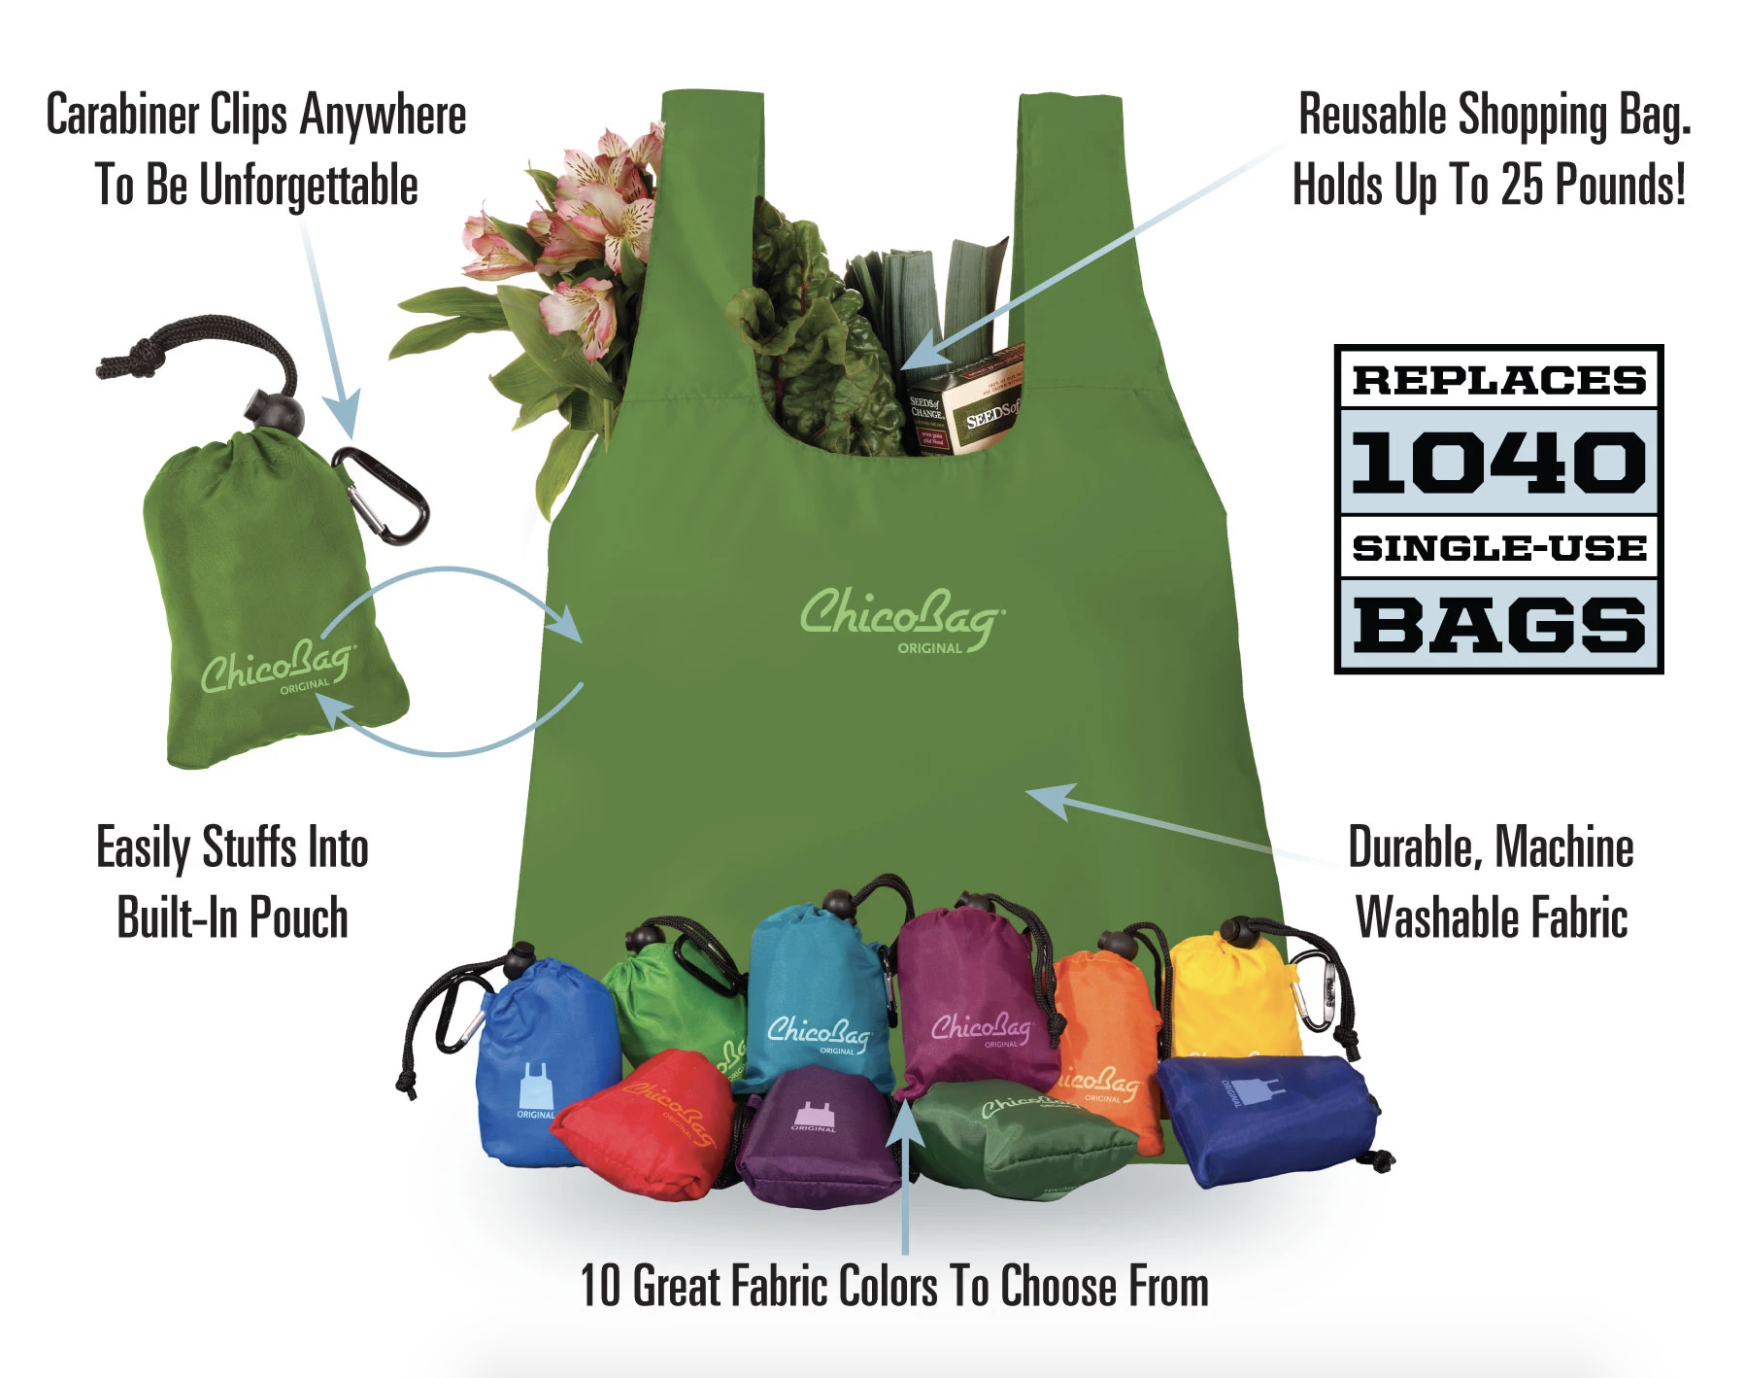 A reusable bag filled with items and text pointing to various parts of the image